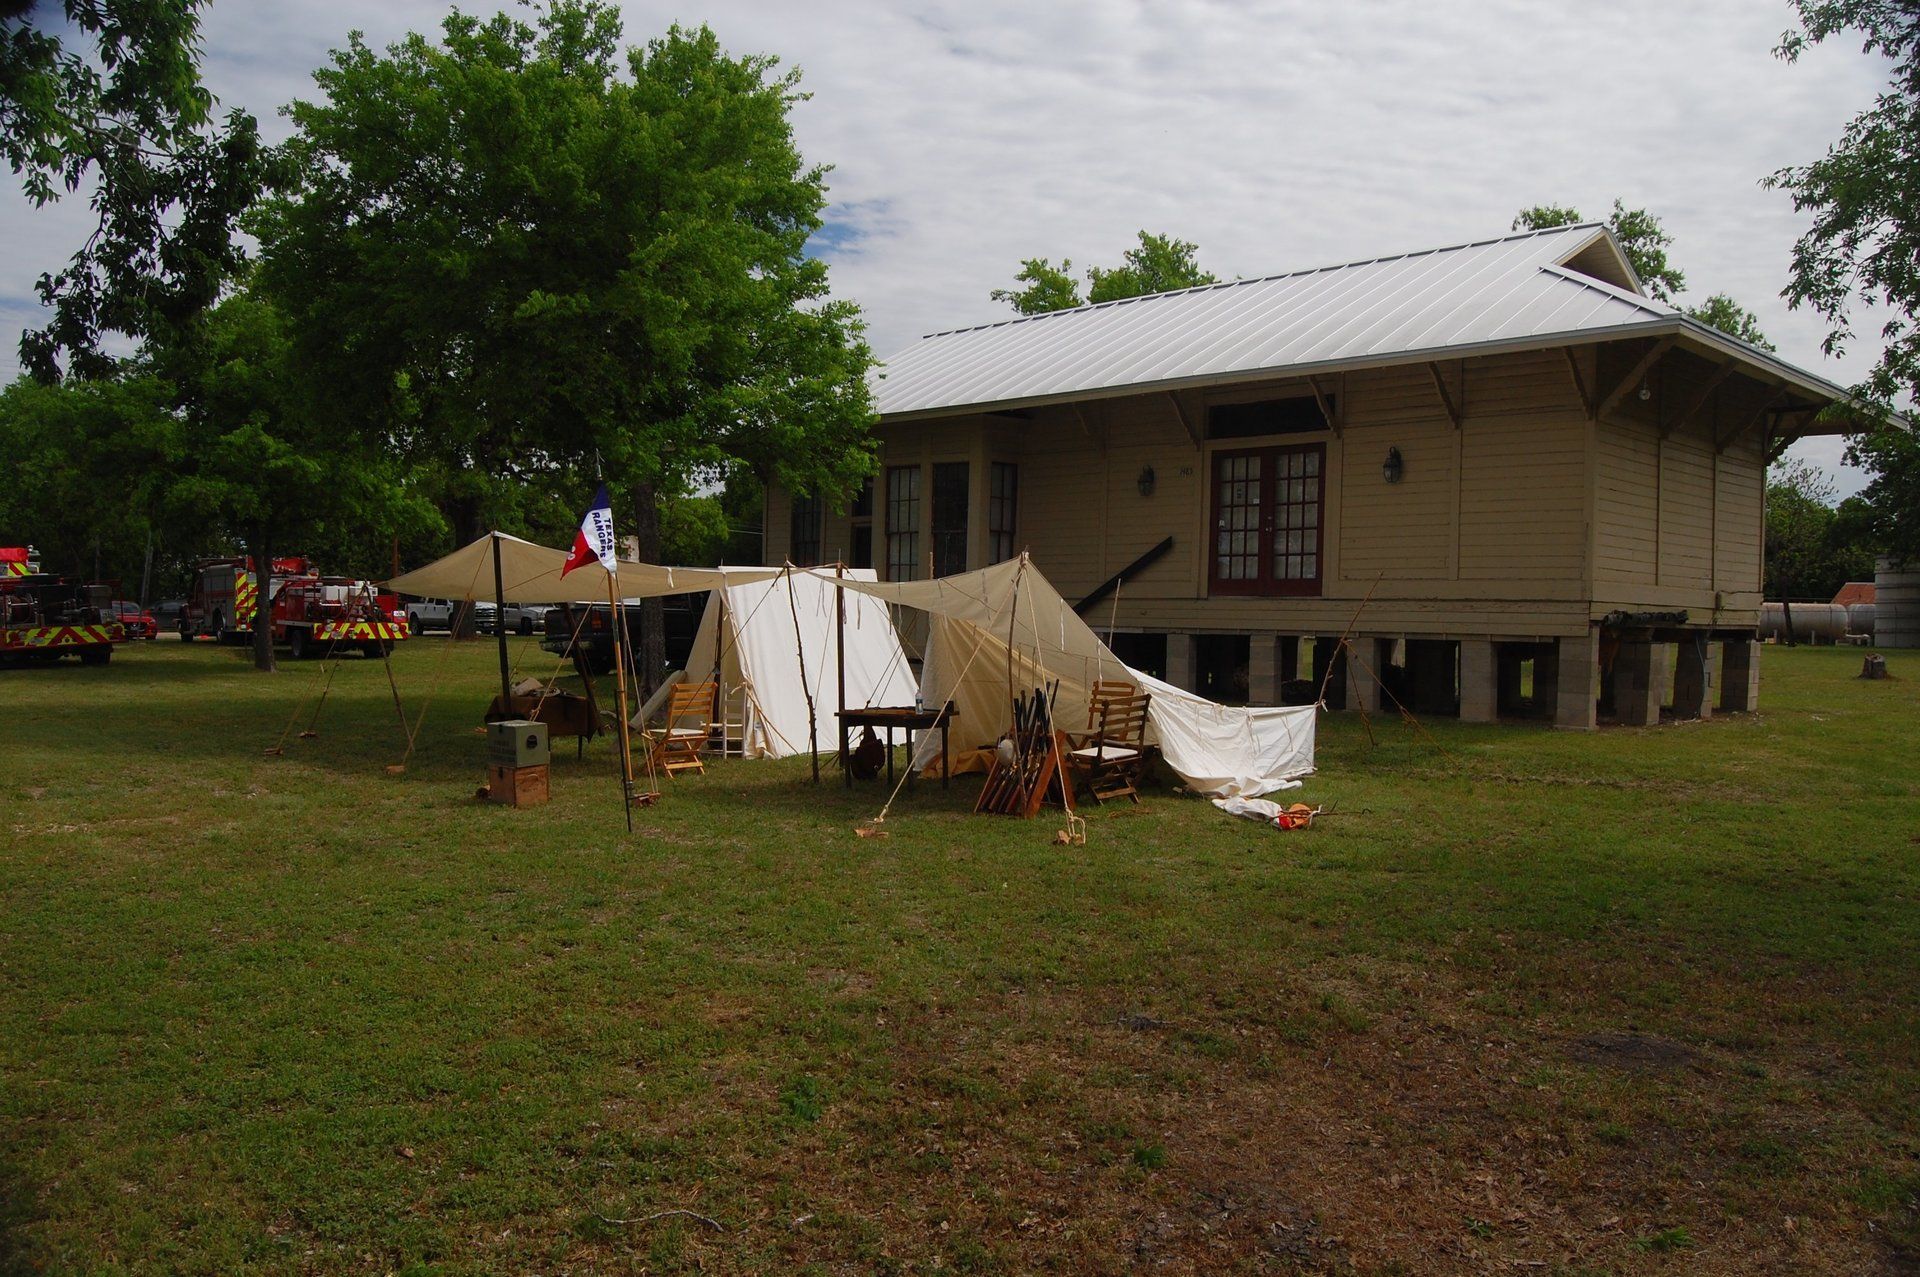 encampment of former Texas Rangers to show camping of the 1800s